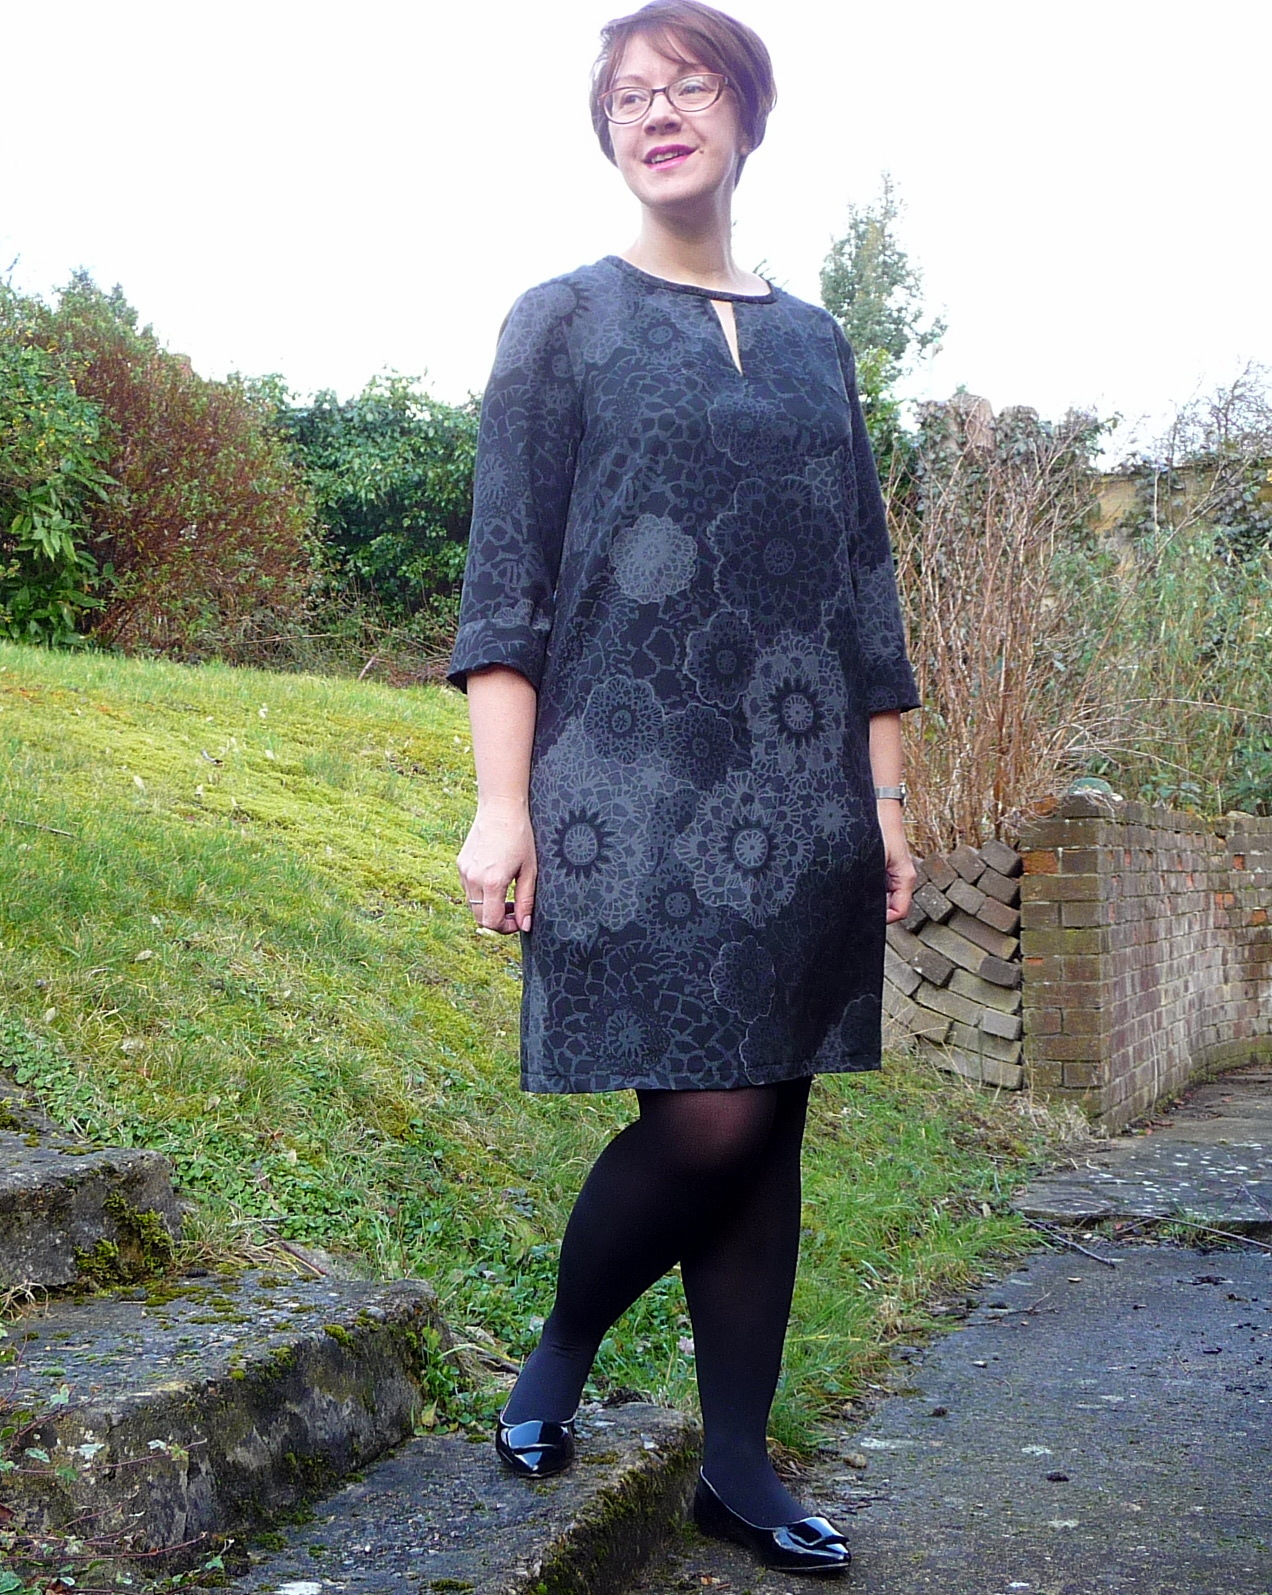 Stitched Up by Samantha: Style Arc Dixie dress in the sunshine